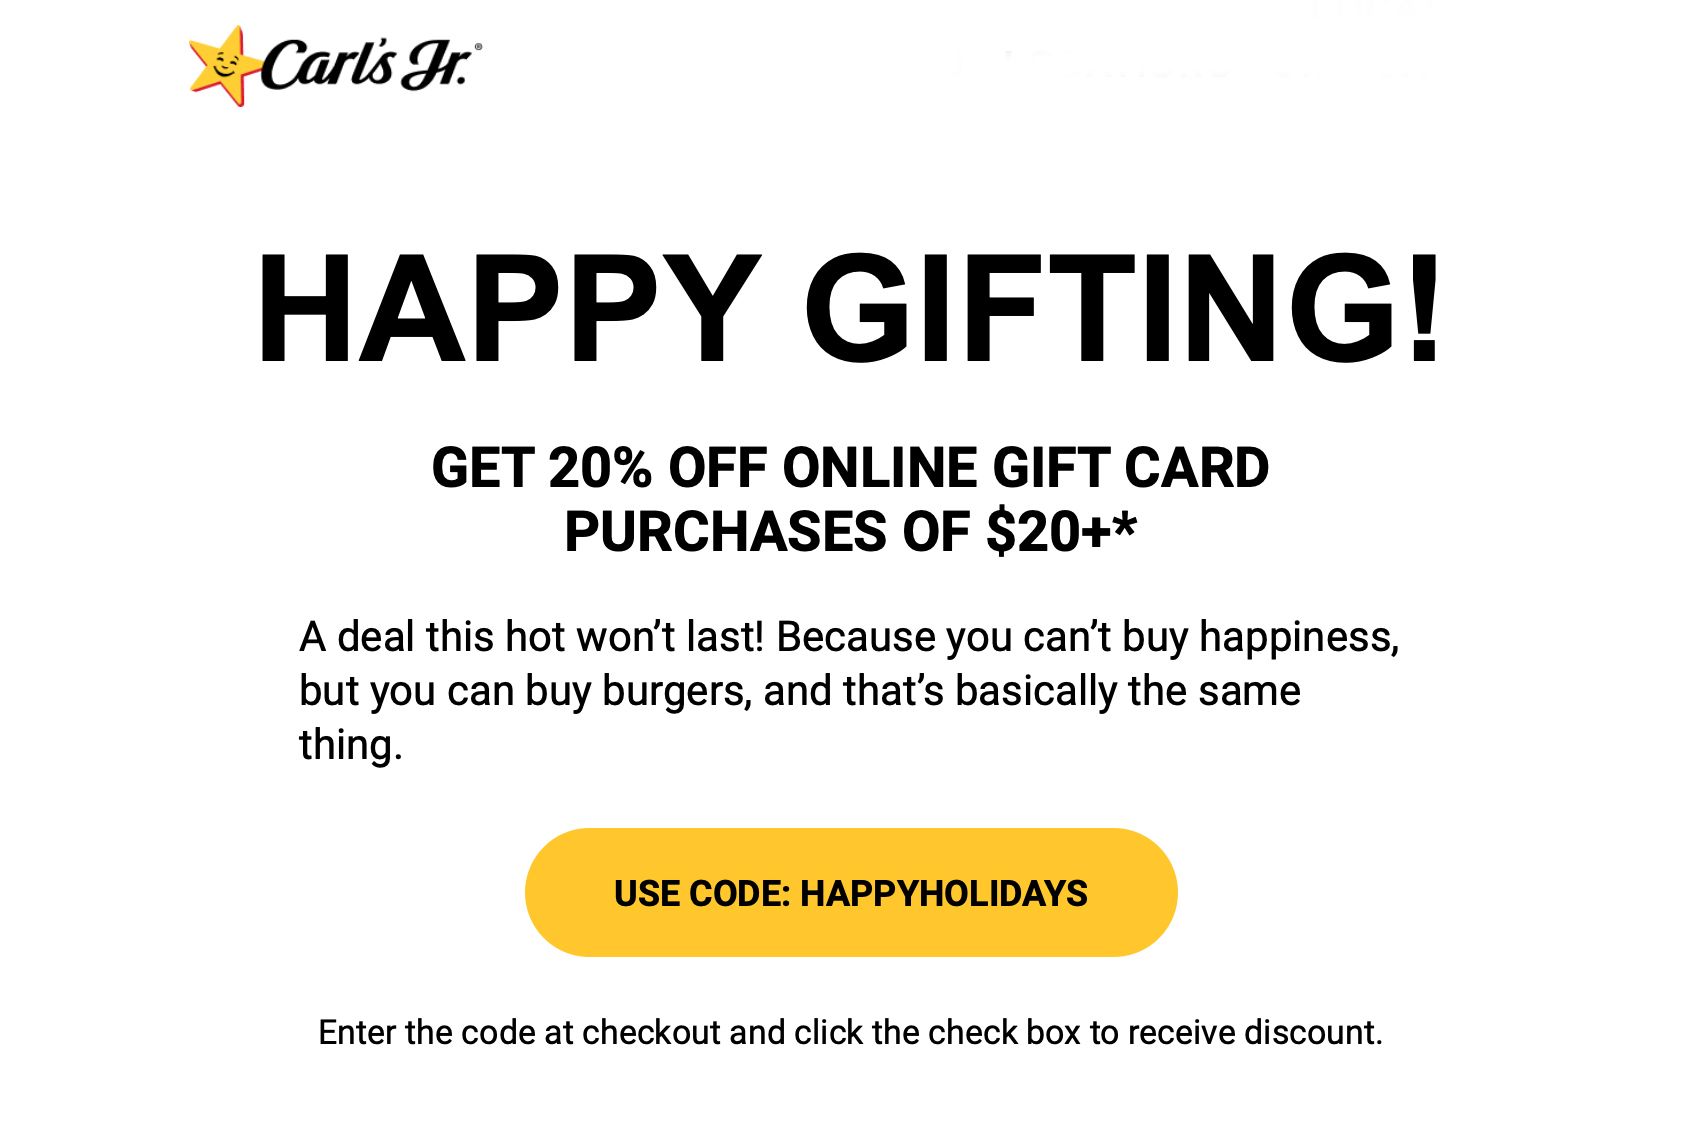 Save 20% with Online Gift Card Purchases of $20 or More at Carl's Jr. with Promo Code